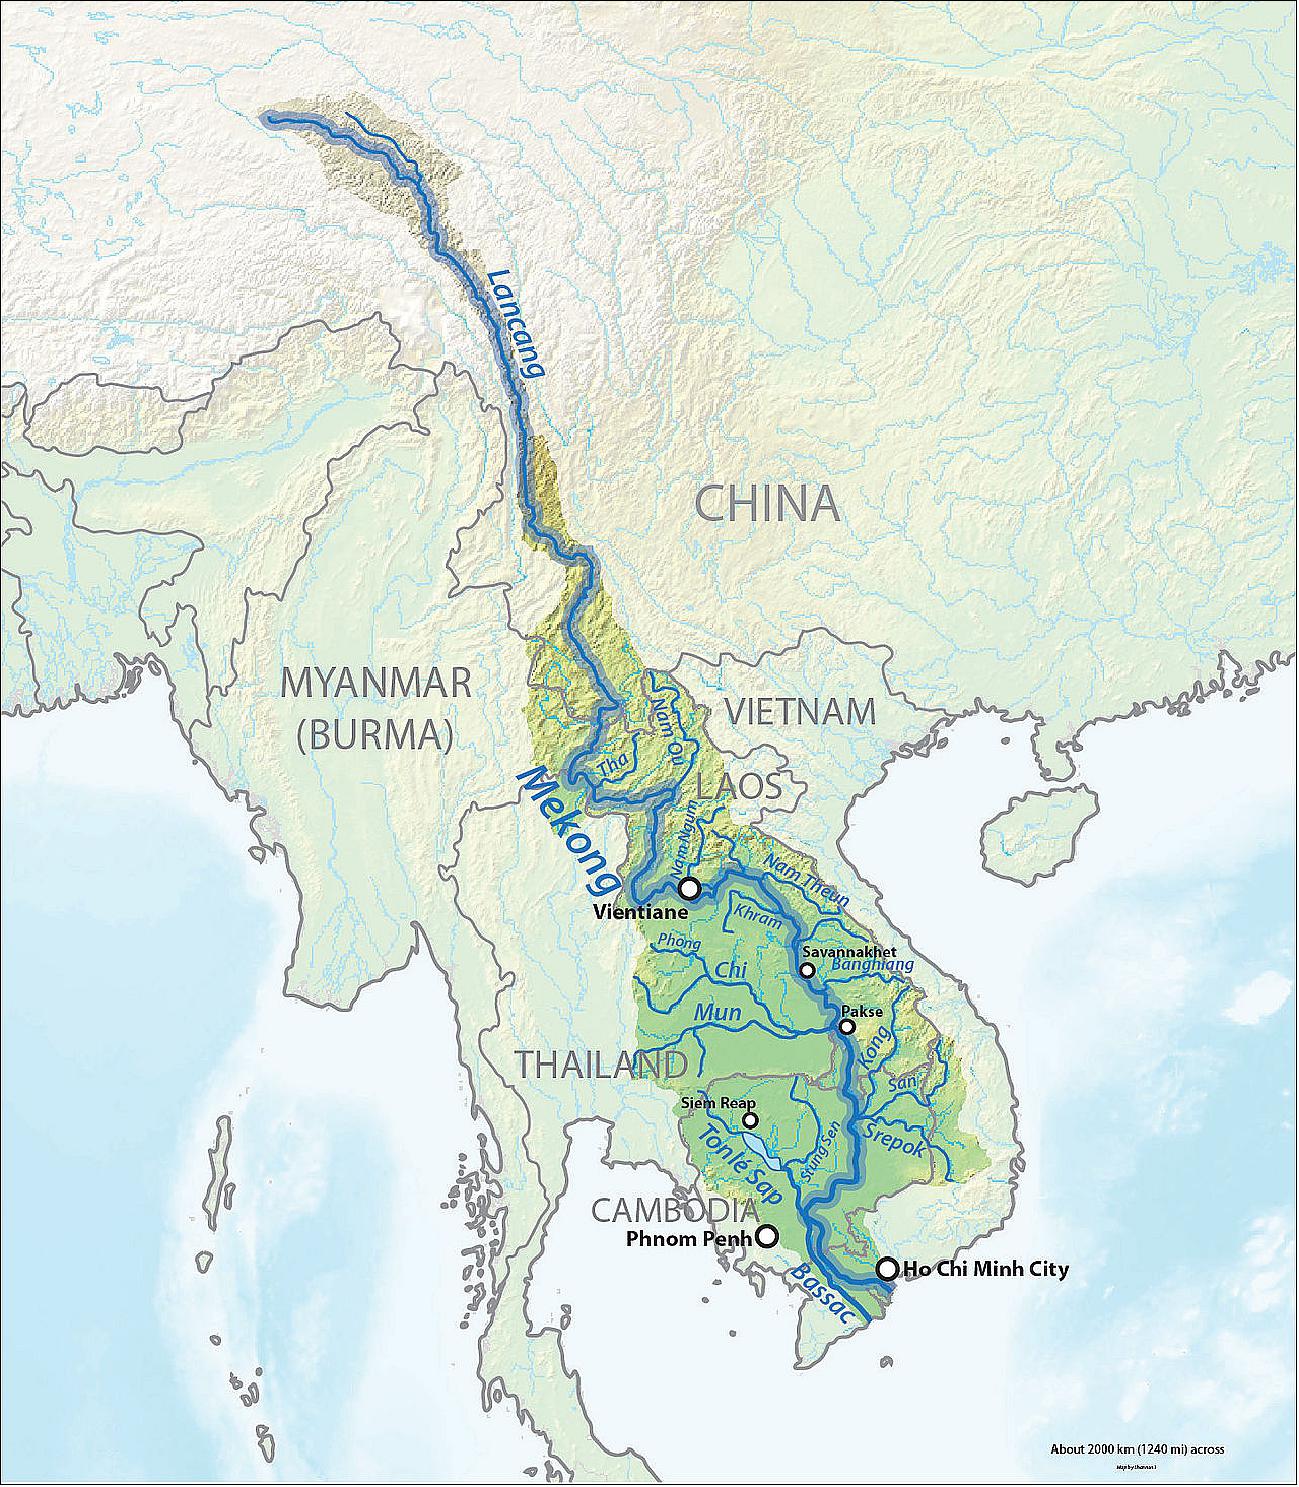 Figure 6: Mekong River basin area is about 5000km long (image credit: Wikipedia) 12)